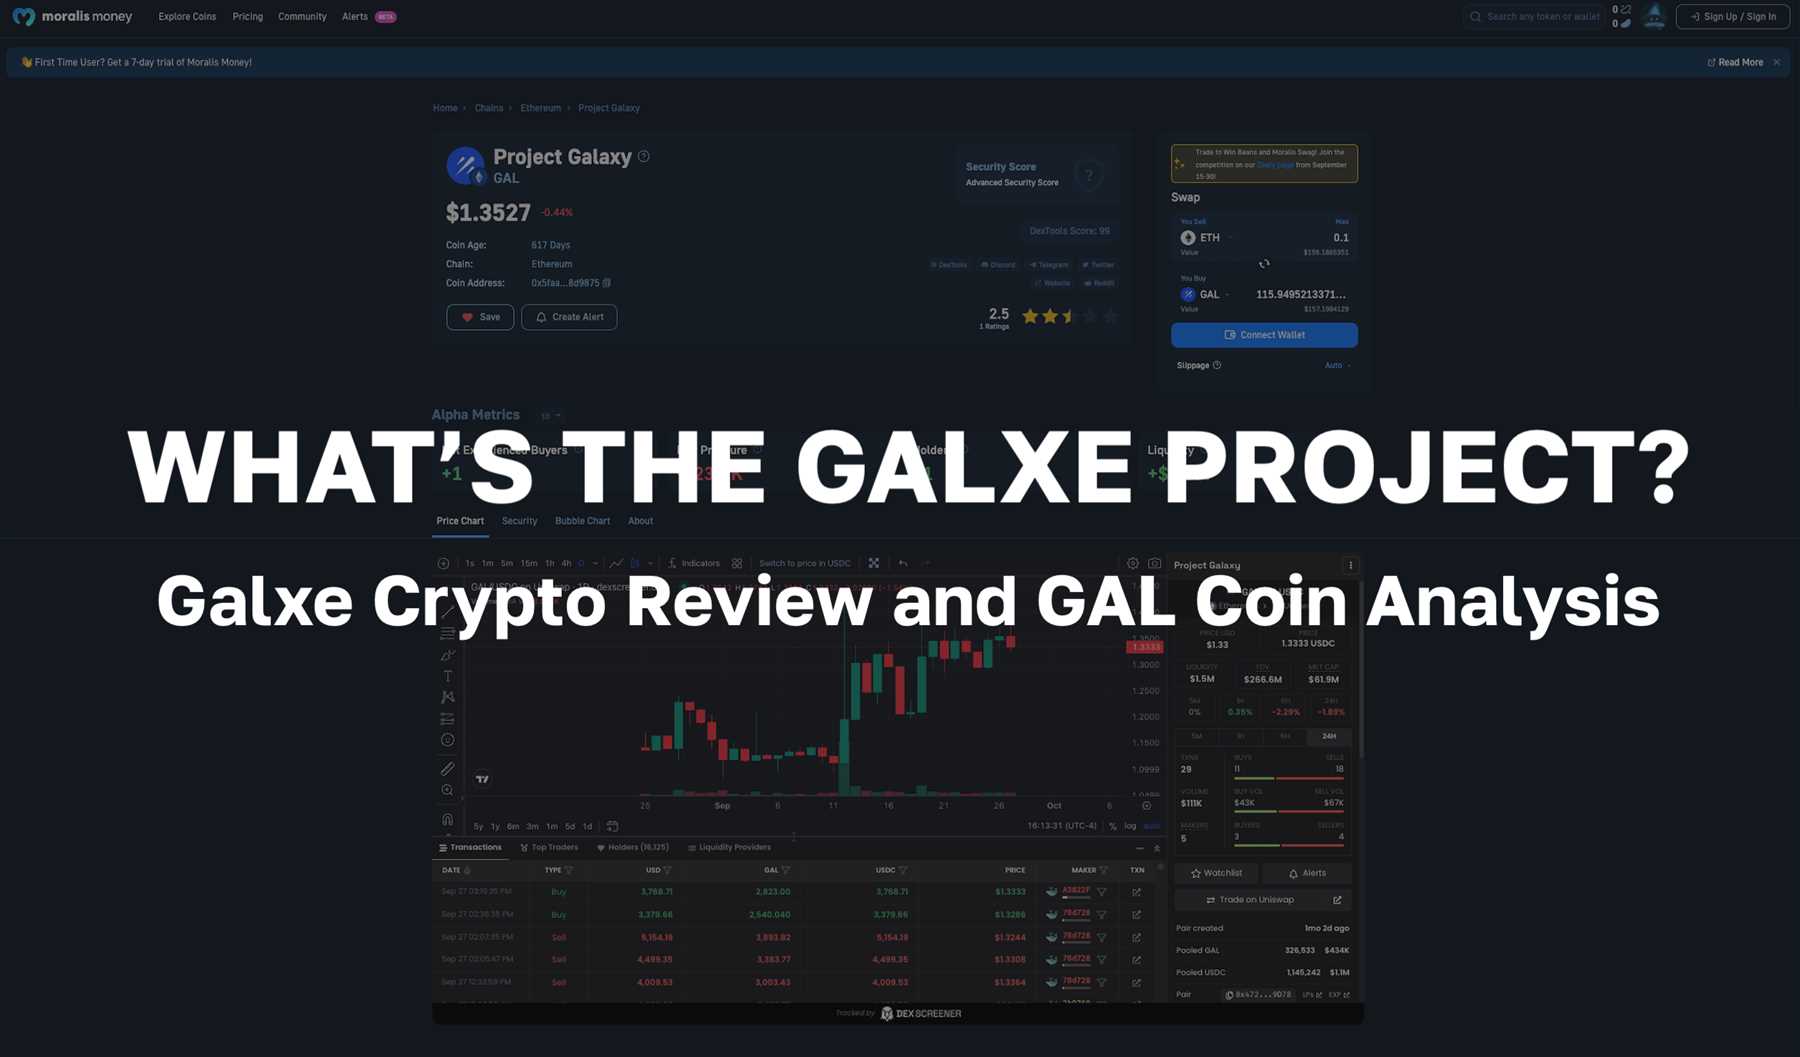 Galxe as a Game-Changer in the Gaming Industry